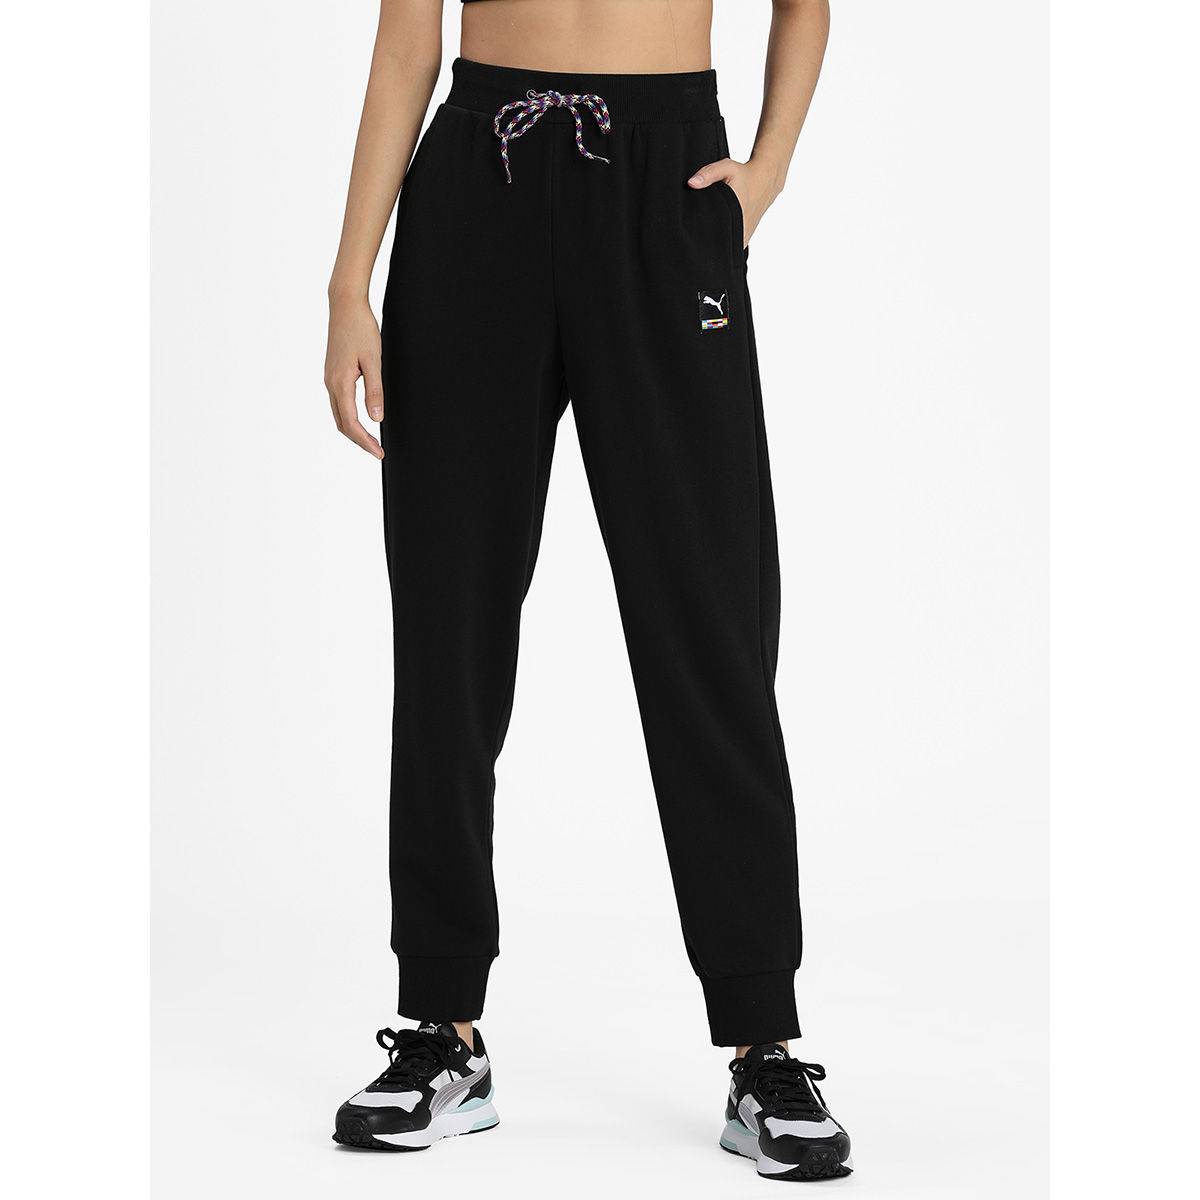 Buy PUMA Faas USP Wind Womens Track Pants Trousers Training Online in India   Etsy